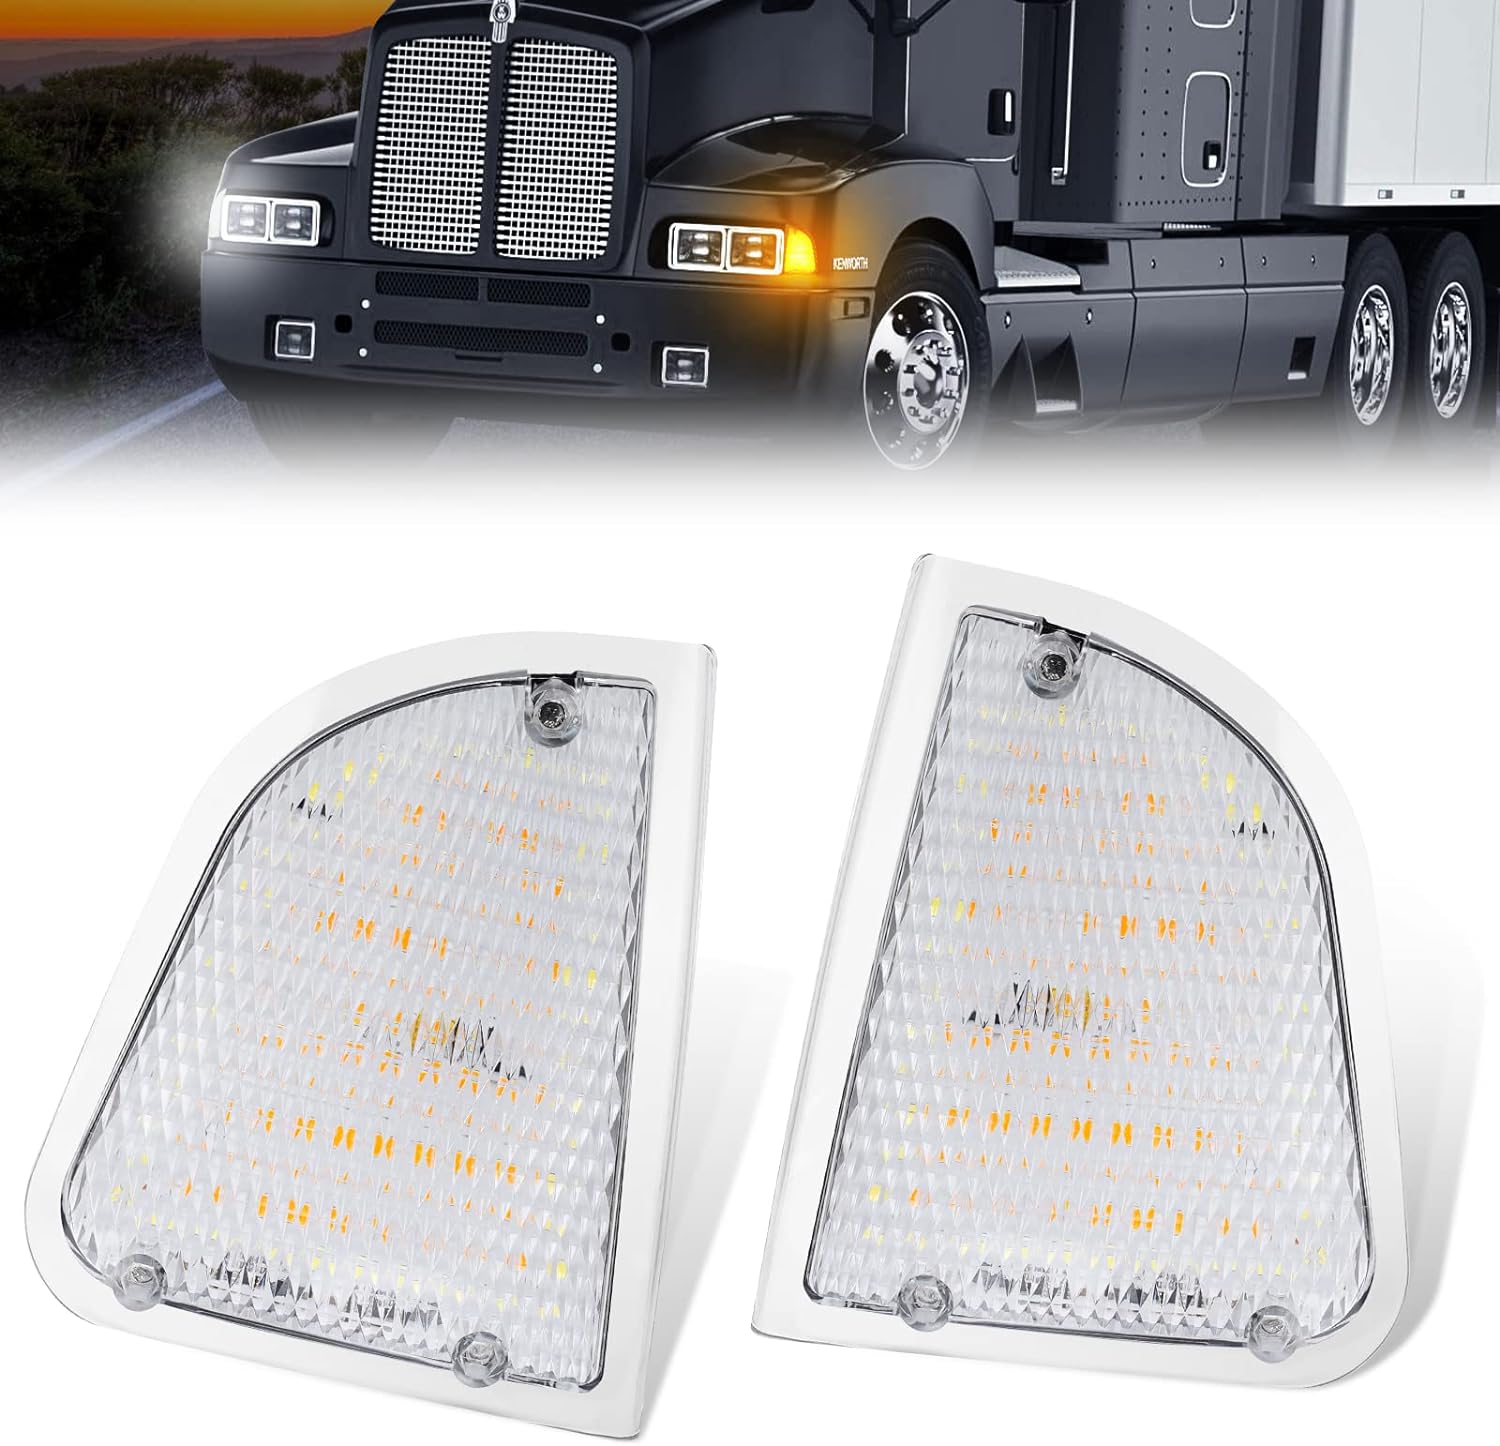 SUPAREE SUPAREE LED Turn Signal Lights Assembly for Kenworth T600 T660 K300 T300 T330 Product description